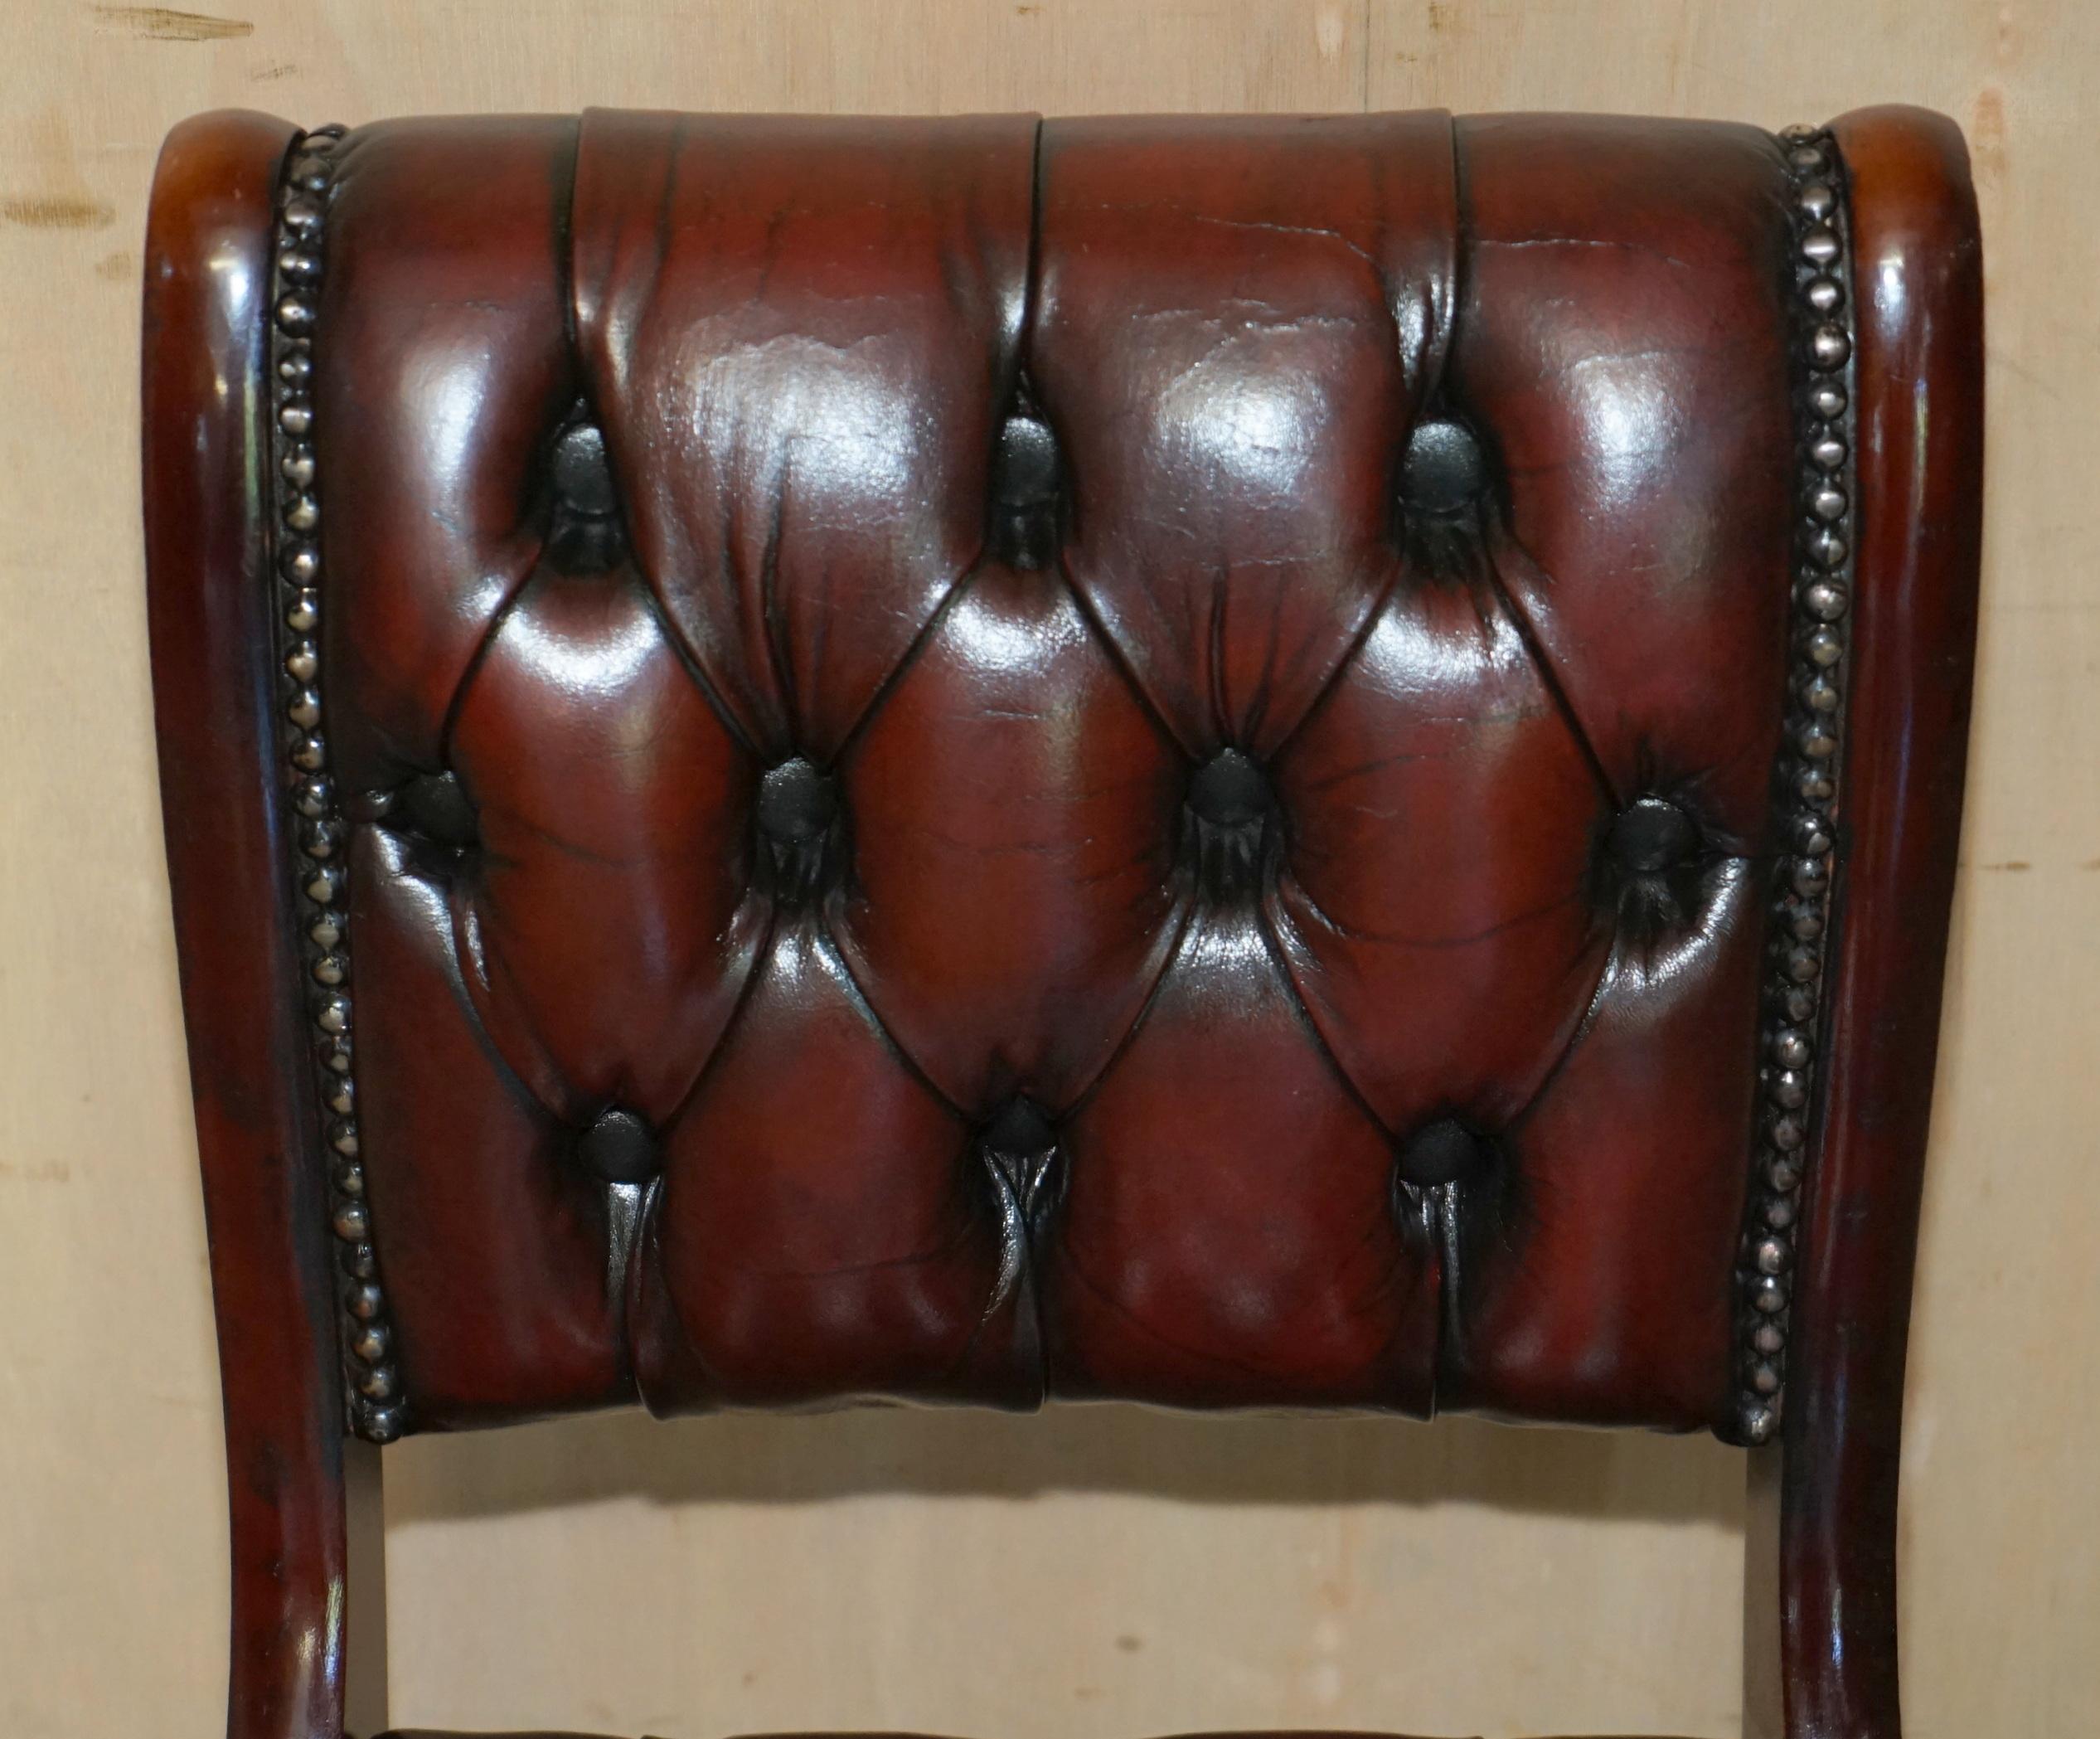 Regency SIX VINTAGE HARDWOOD FULLY RESTORED CHESTERFIELD OXBOOD LEATHER DiNING CHAIRS 6 For Sale